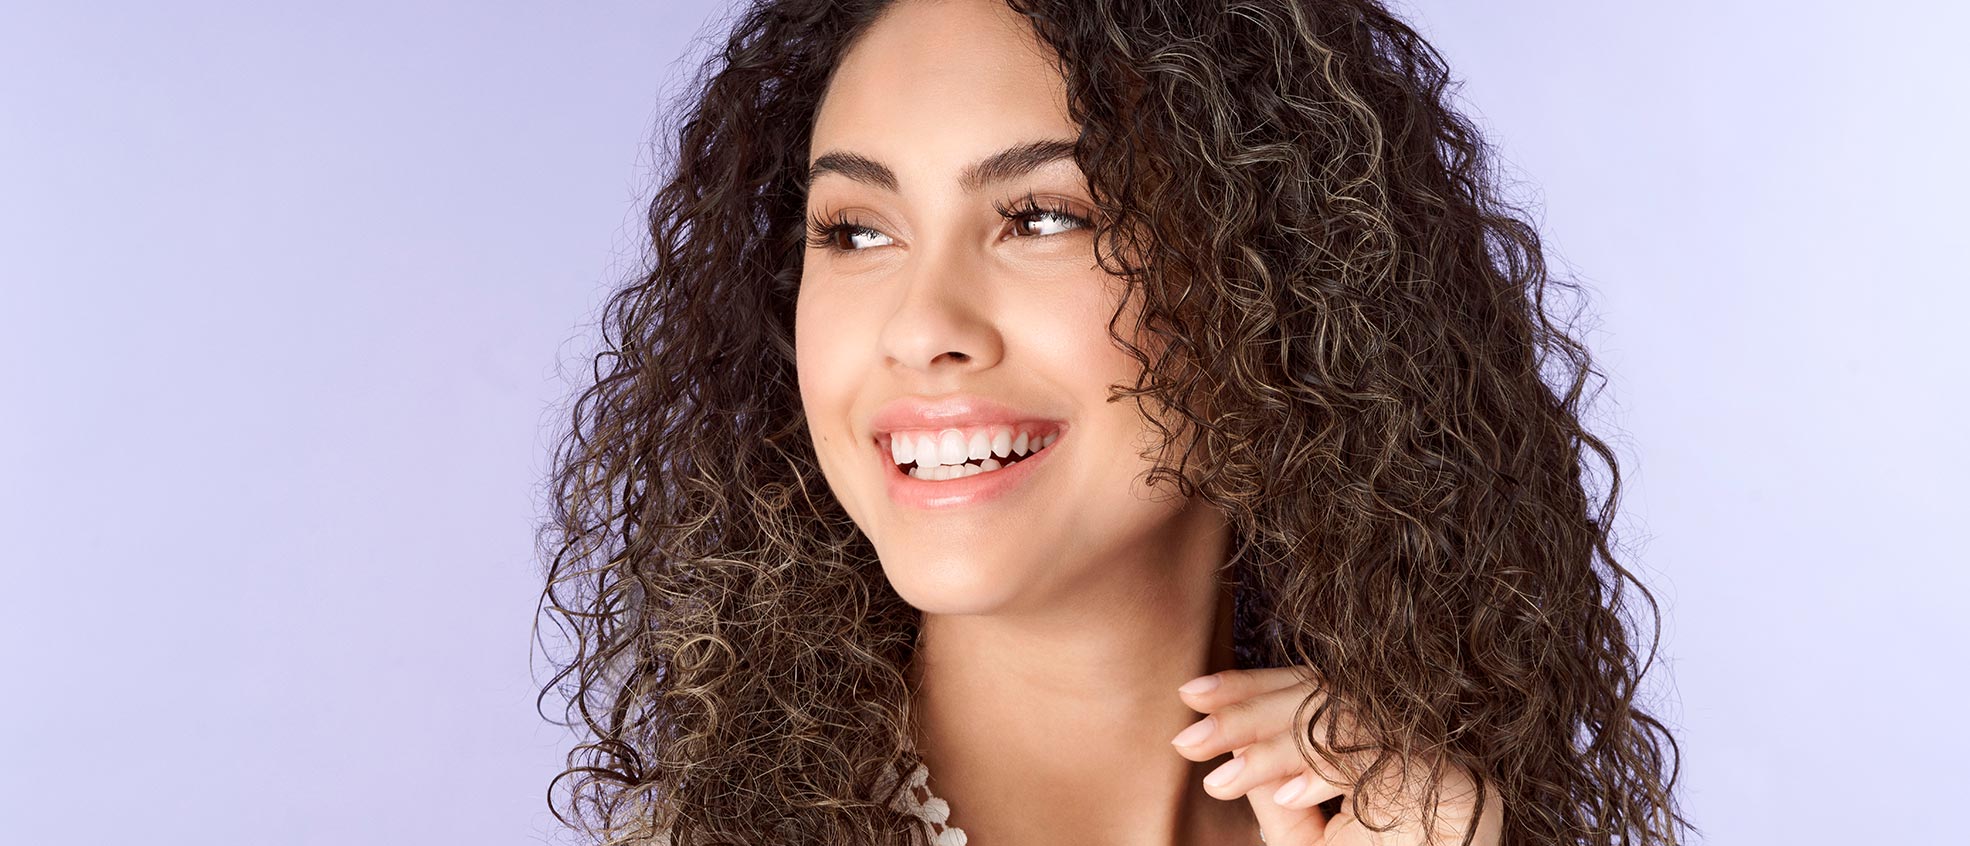 A brunette woman with curly hair smiling and looking to the side.